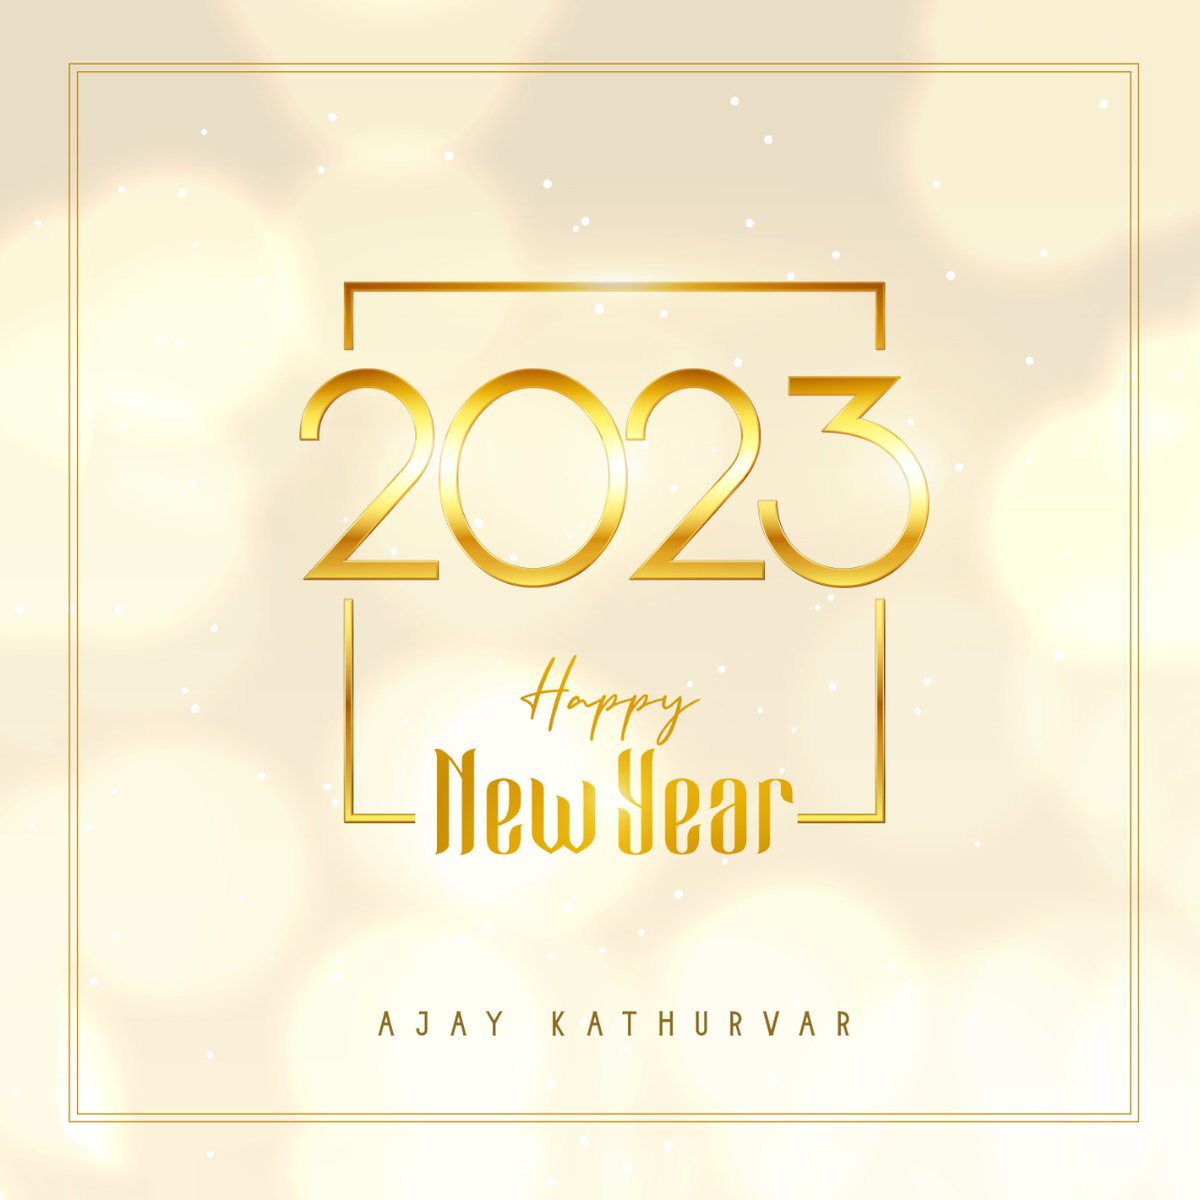 Wishing you and your family a happy new year filled with hope, health, and happiness - with a generous sprinkle of fun! #HappyNewYear #HappyNewYear2023 #NewYear #NewYear2023 #NewBeginings #Success #Happiness